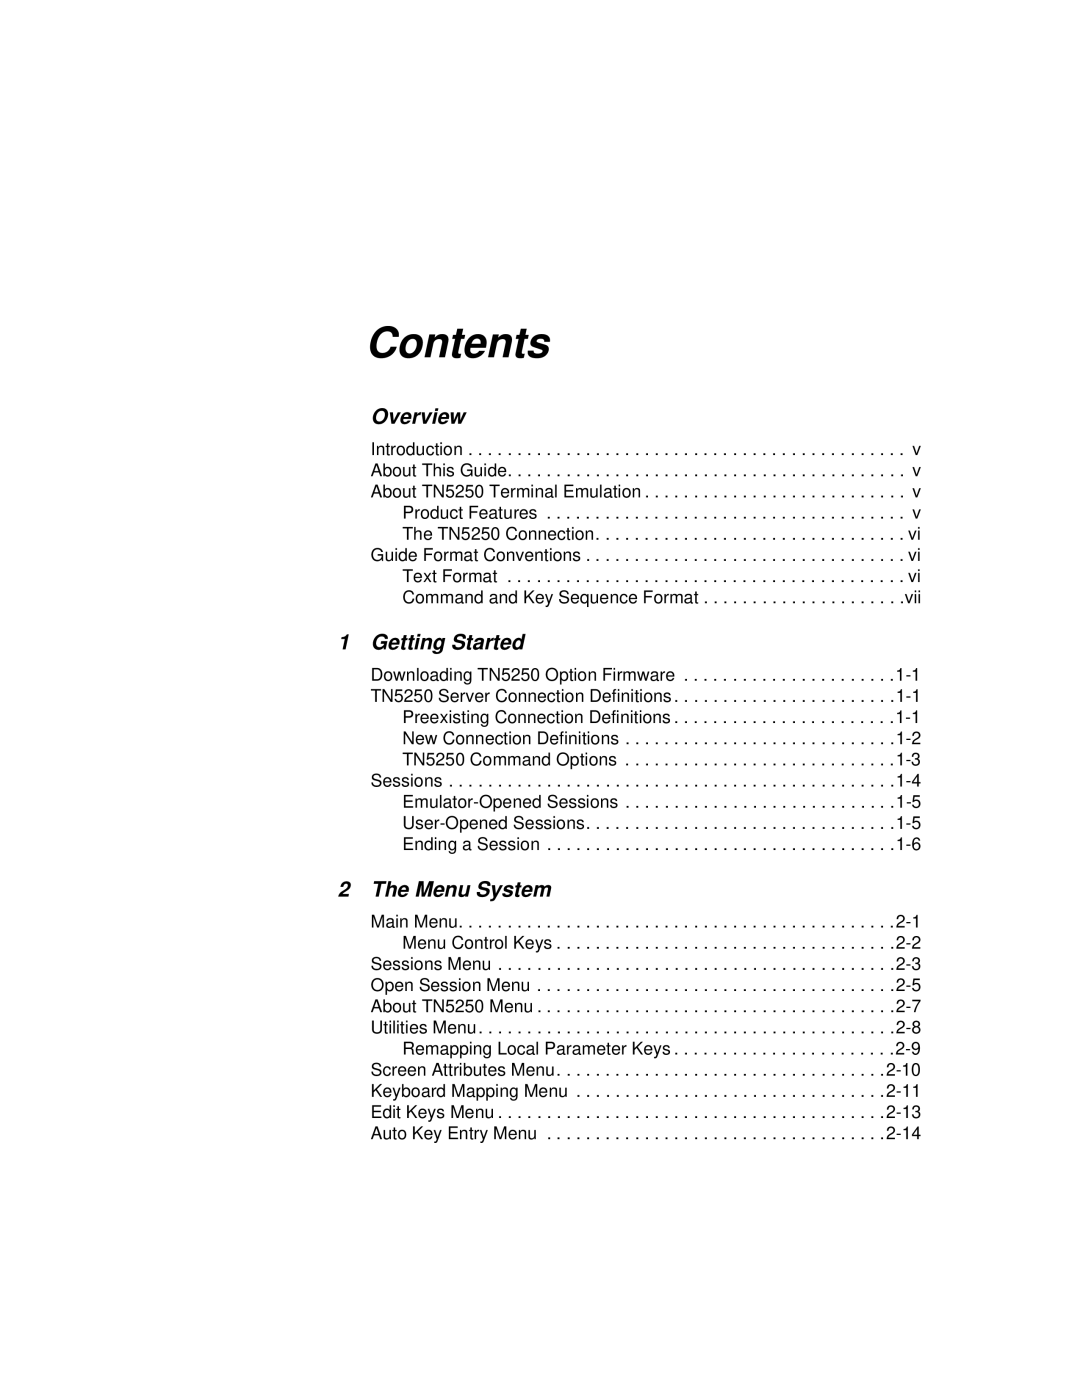 IBM TN5250 manual Contents, Overview, Getting Started, The Menu System 